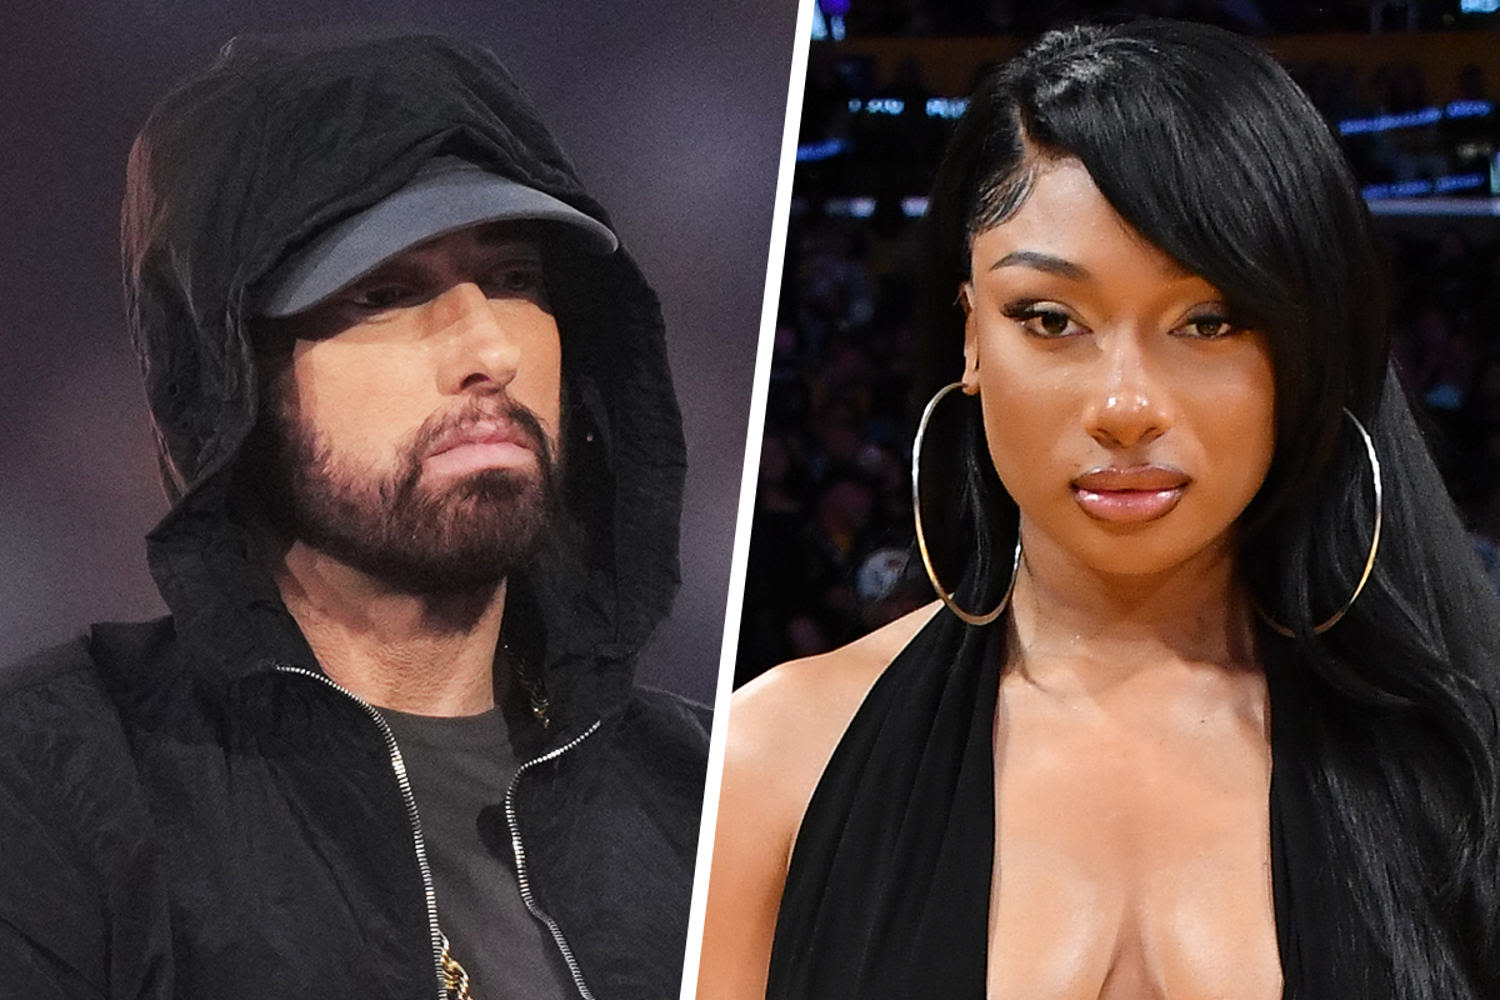 Eminem faces backlash after referring to Megan Thee Stallion shooting in new song